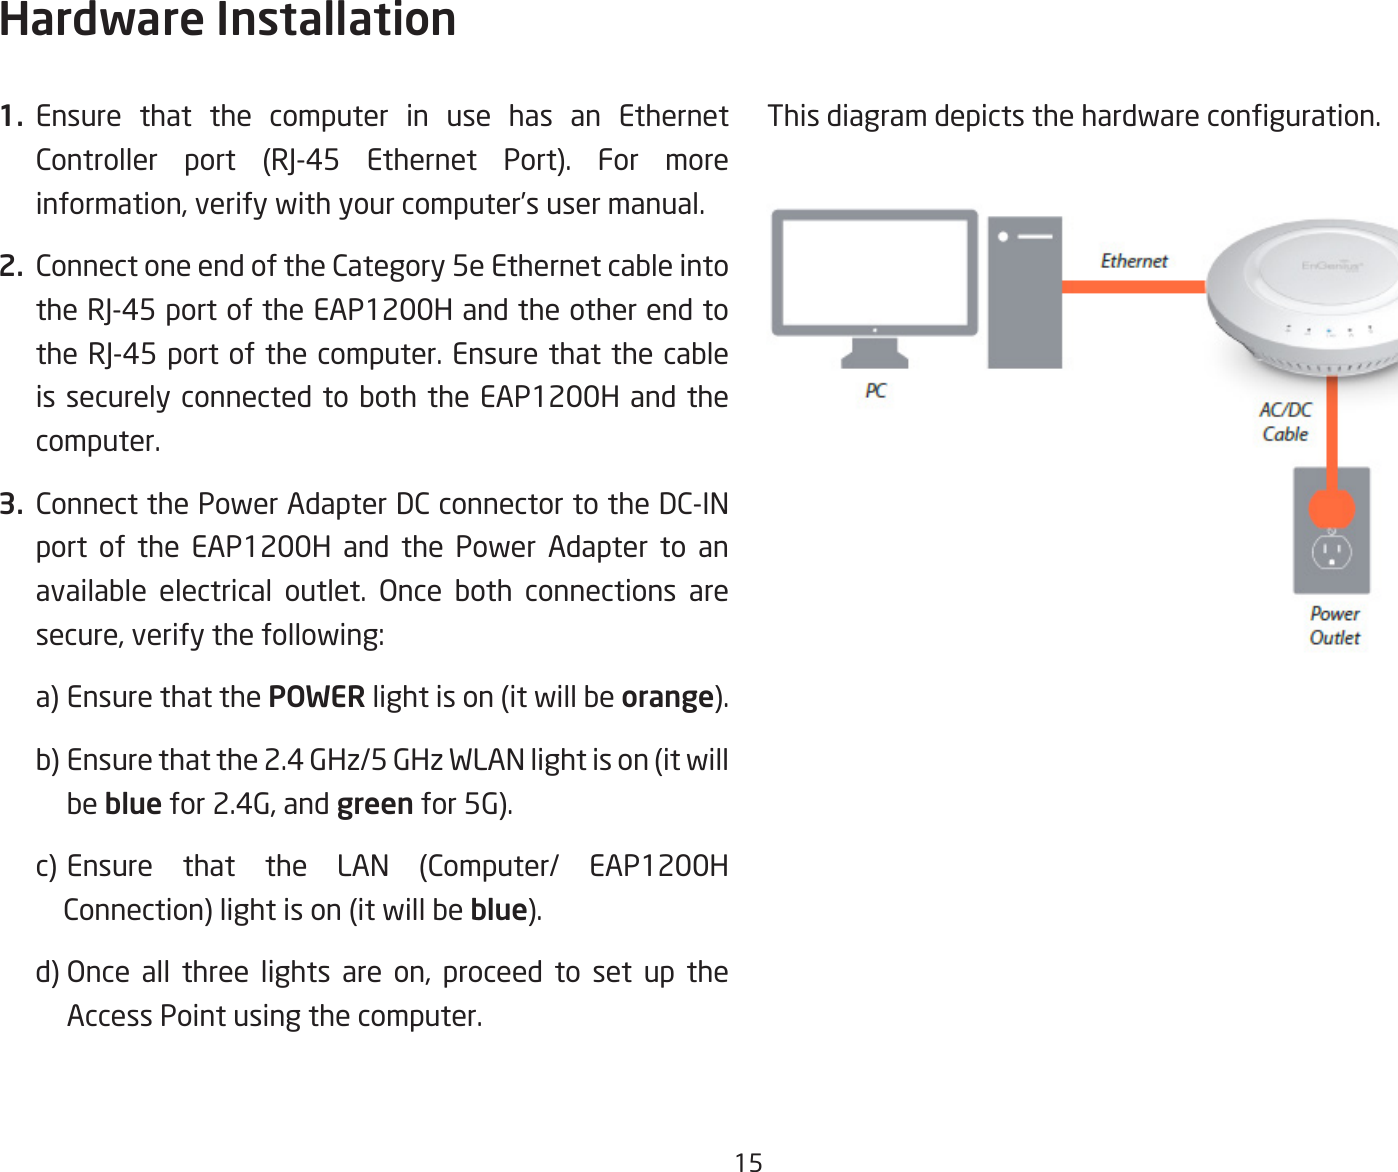 151. Ensure that the computer in use has an Ethernet Controller port (RJ-45 Ethernet Port). For moreinformation,verifywithyourcomputer’susermanual.2.  Connect one end of the Category 5e Ethernet cable into theRJ-45portoftheEAP1200HandtheotherendtotheRJ-45portofthecomputer.Ensurethatthecableis securely connected to both the EAP1200H and the computer.3. Connect the Power Adapter DC connector to the DC-IN port of the EAP1200H and the Power Adapter to an available electrical outlet. Once both connections are secure,verifythefollowing:    a) Ensure that the POWER light is on (it will be orange).    b) Ensure that the 2.4 GHz/5 GHz WLAN light is on (it will  be bluefor2.4G,andgreen for 5G).  c) Ensure that the LAN (Computer/ EAP1200H       Connection) light is on (it will be blue).  d)Once all three lights are on, proceed to set up the   Access Point using the computer.Thisdiagramdepictsthehardwareconguration.Hardware Installation